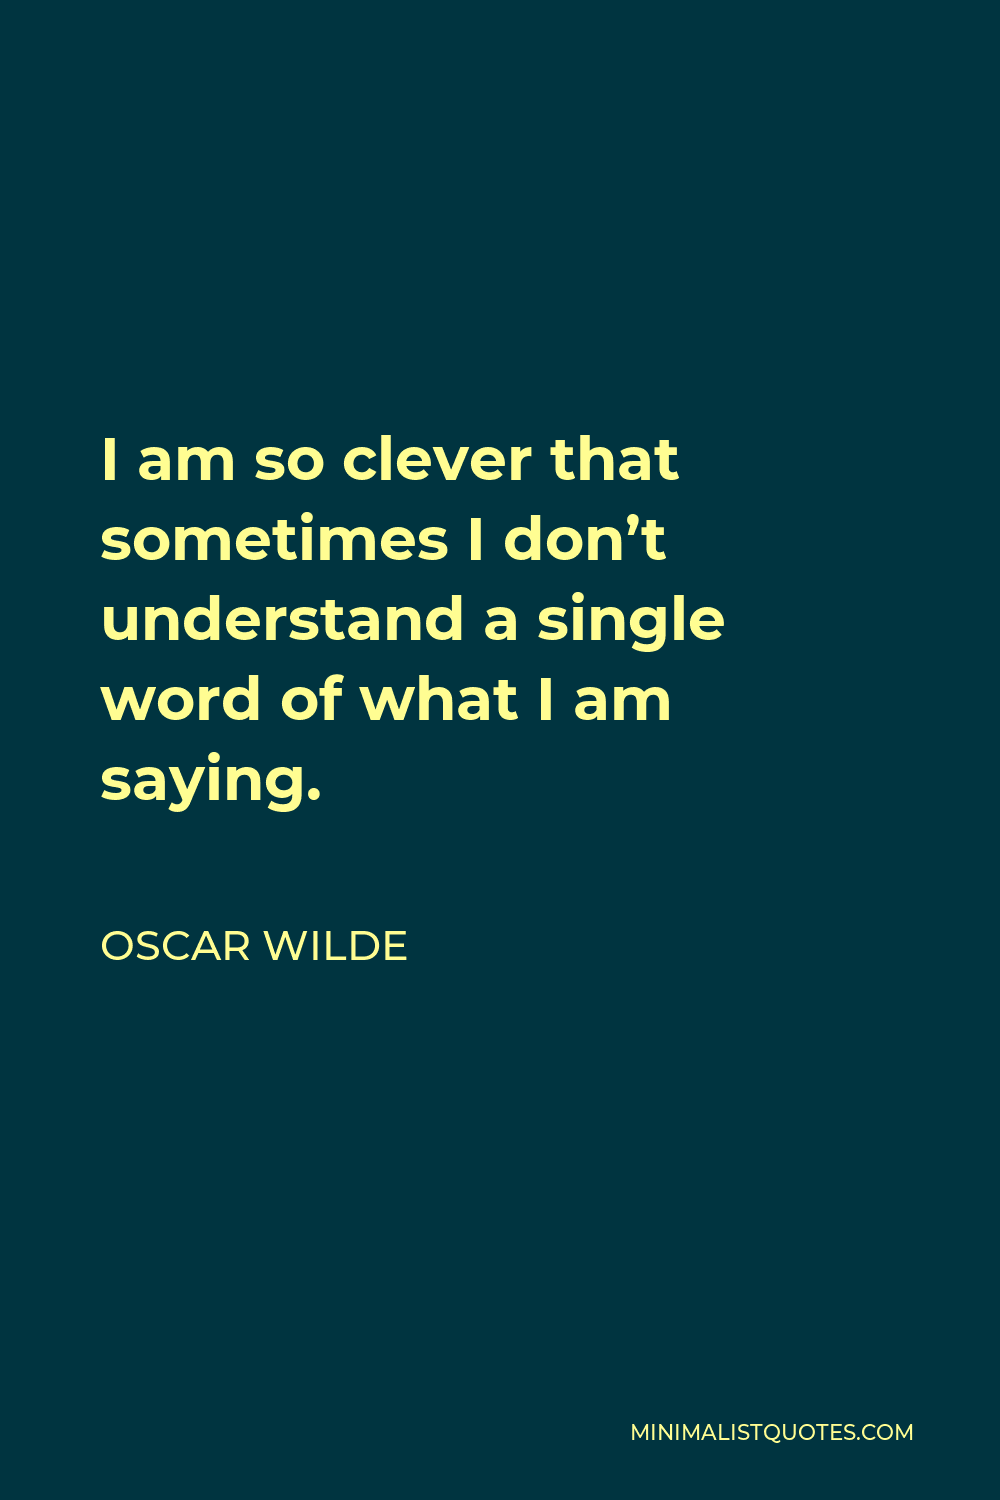 Oscar Wilde Quote - I am so clever that sometimes I don’t understand a single word of what I am saying.